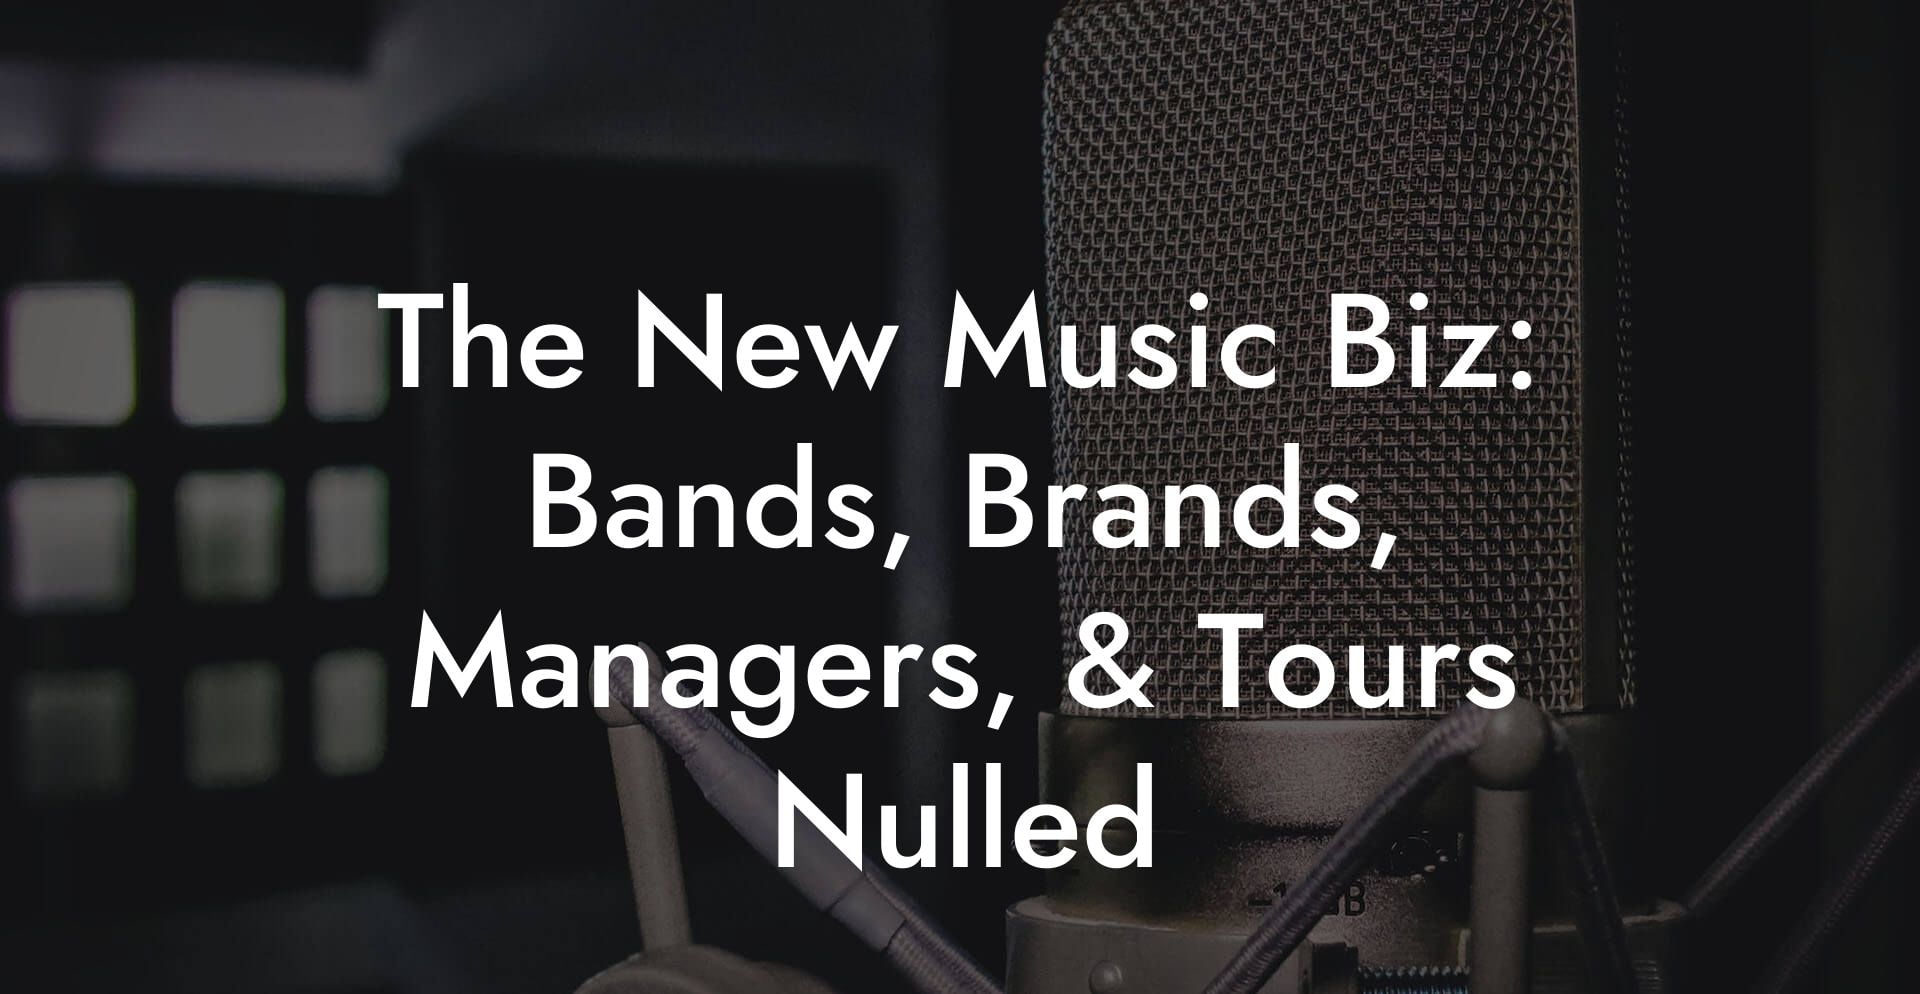 The New Music Biz: Bands, Brands, Managers, & Tours Nulled